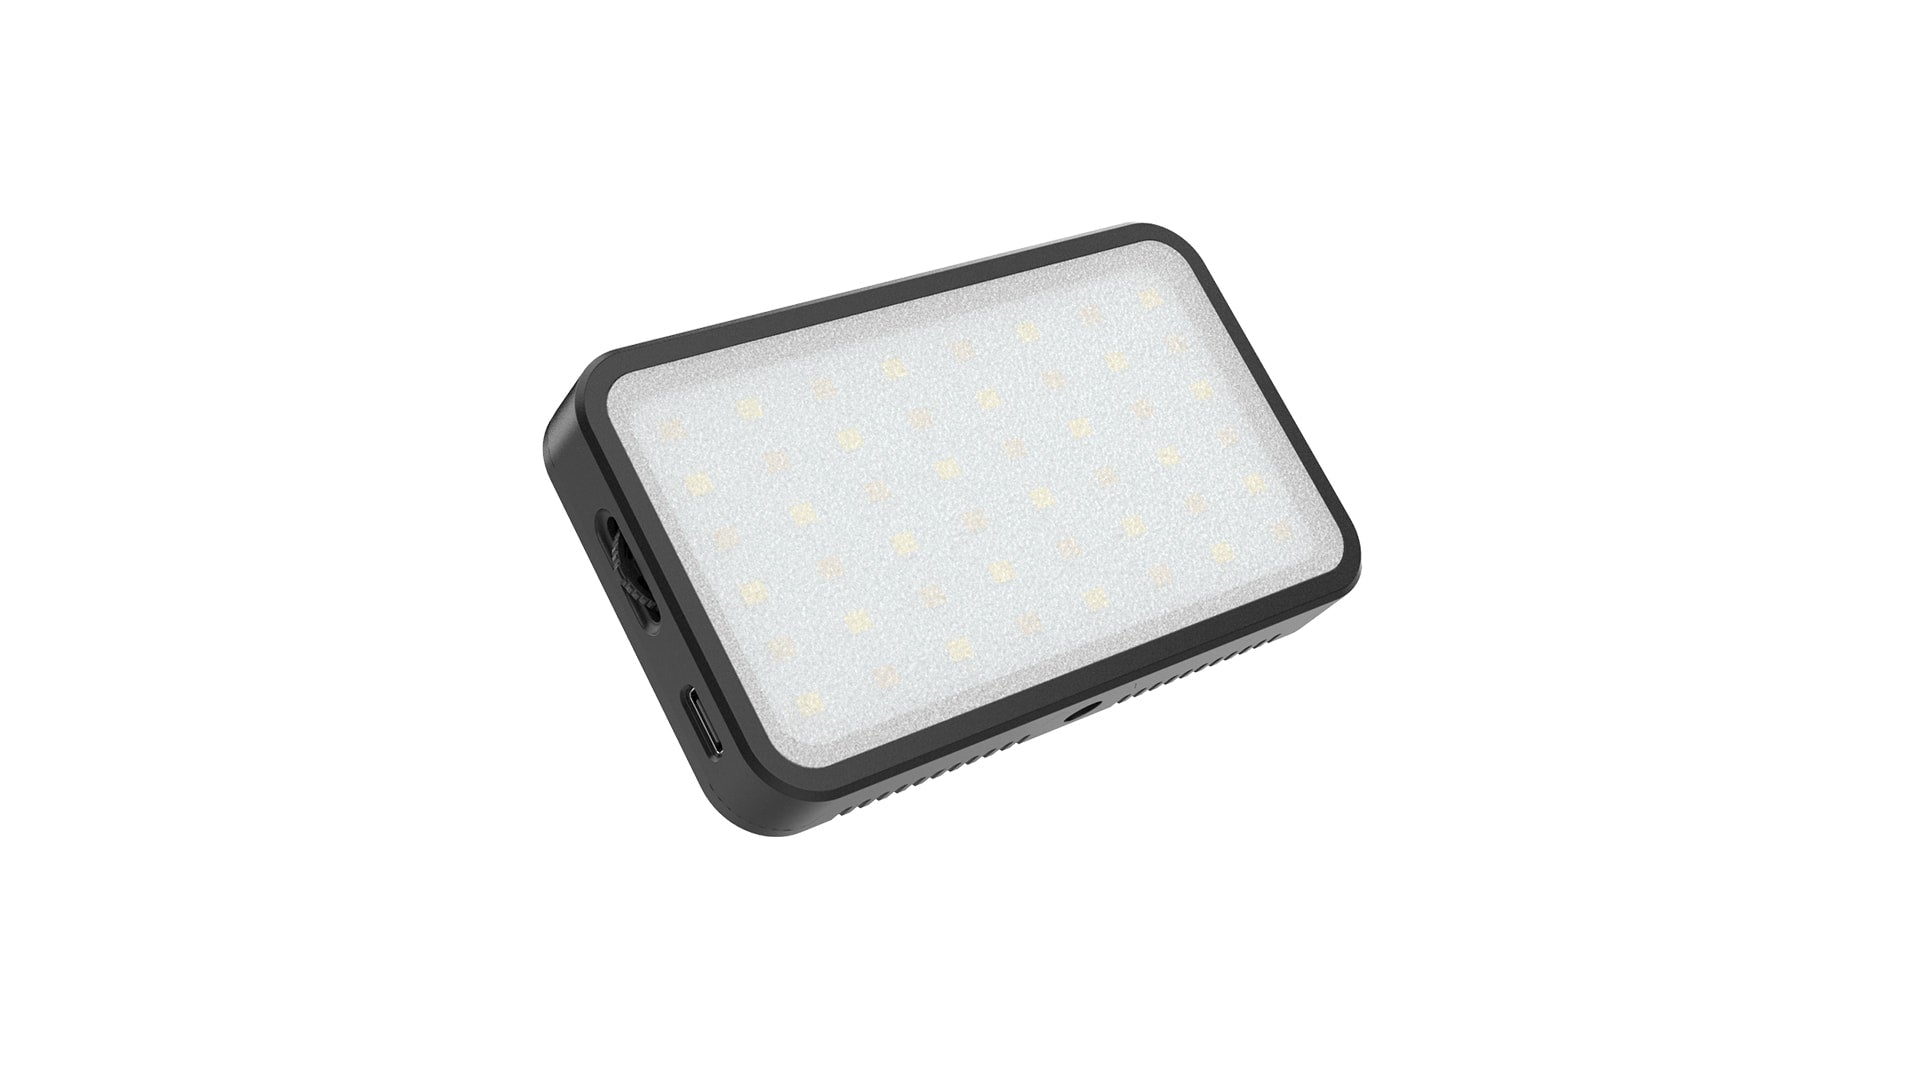 COLBOR PL5 best portable LED light for video that works for smartphone shooting